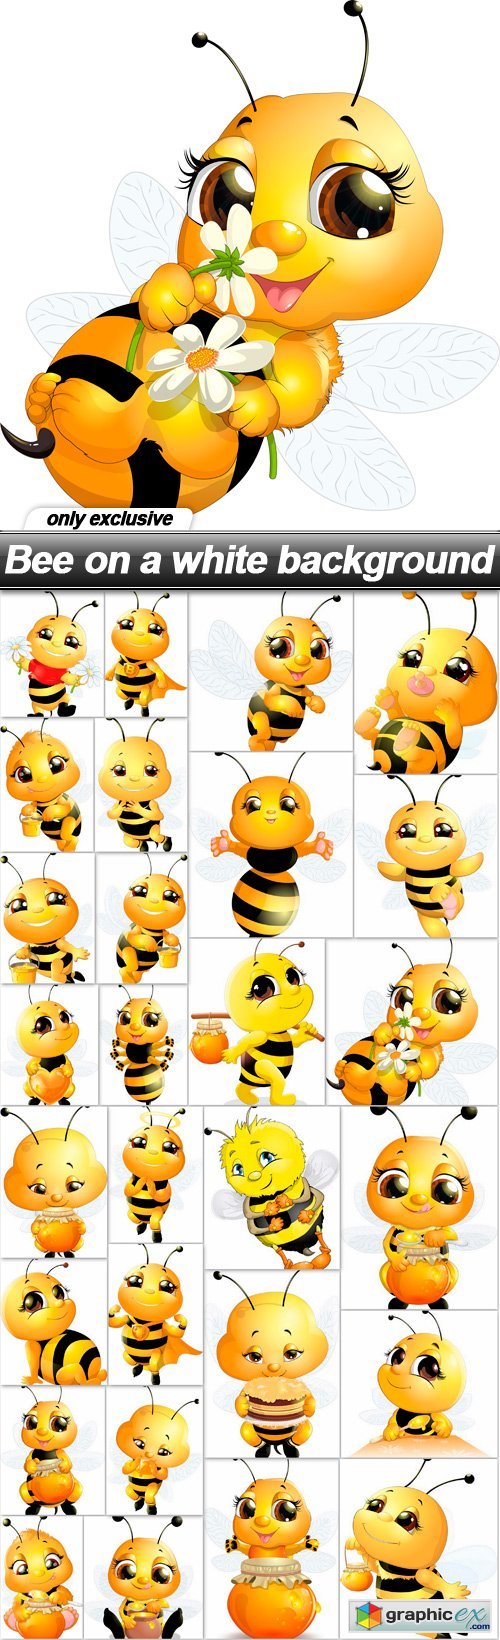 Bee on a white background - 28 EPS